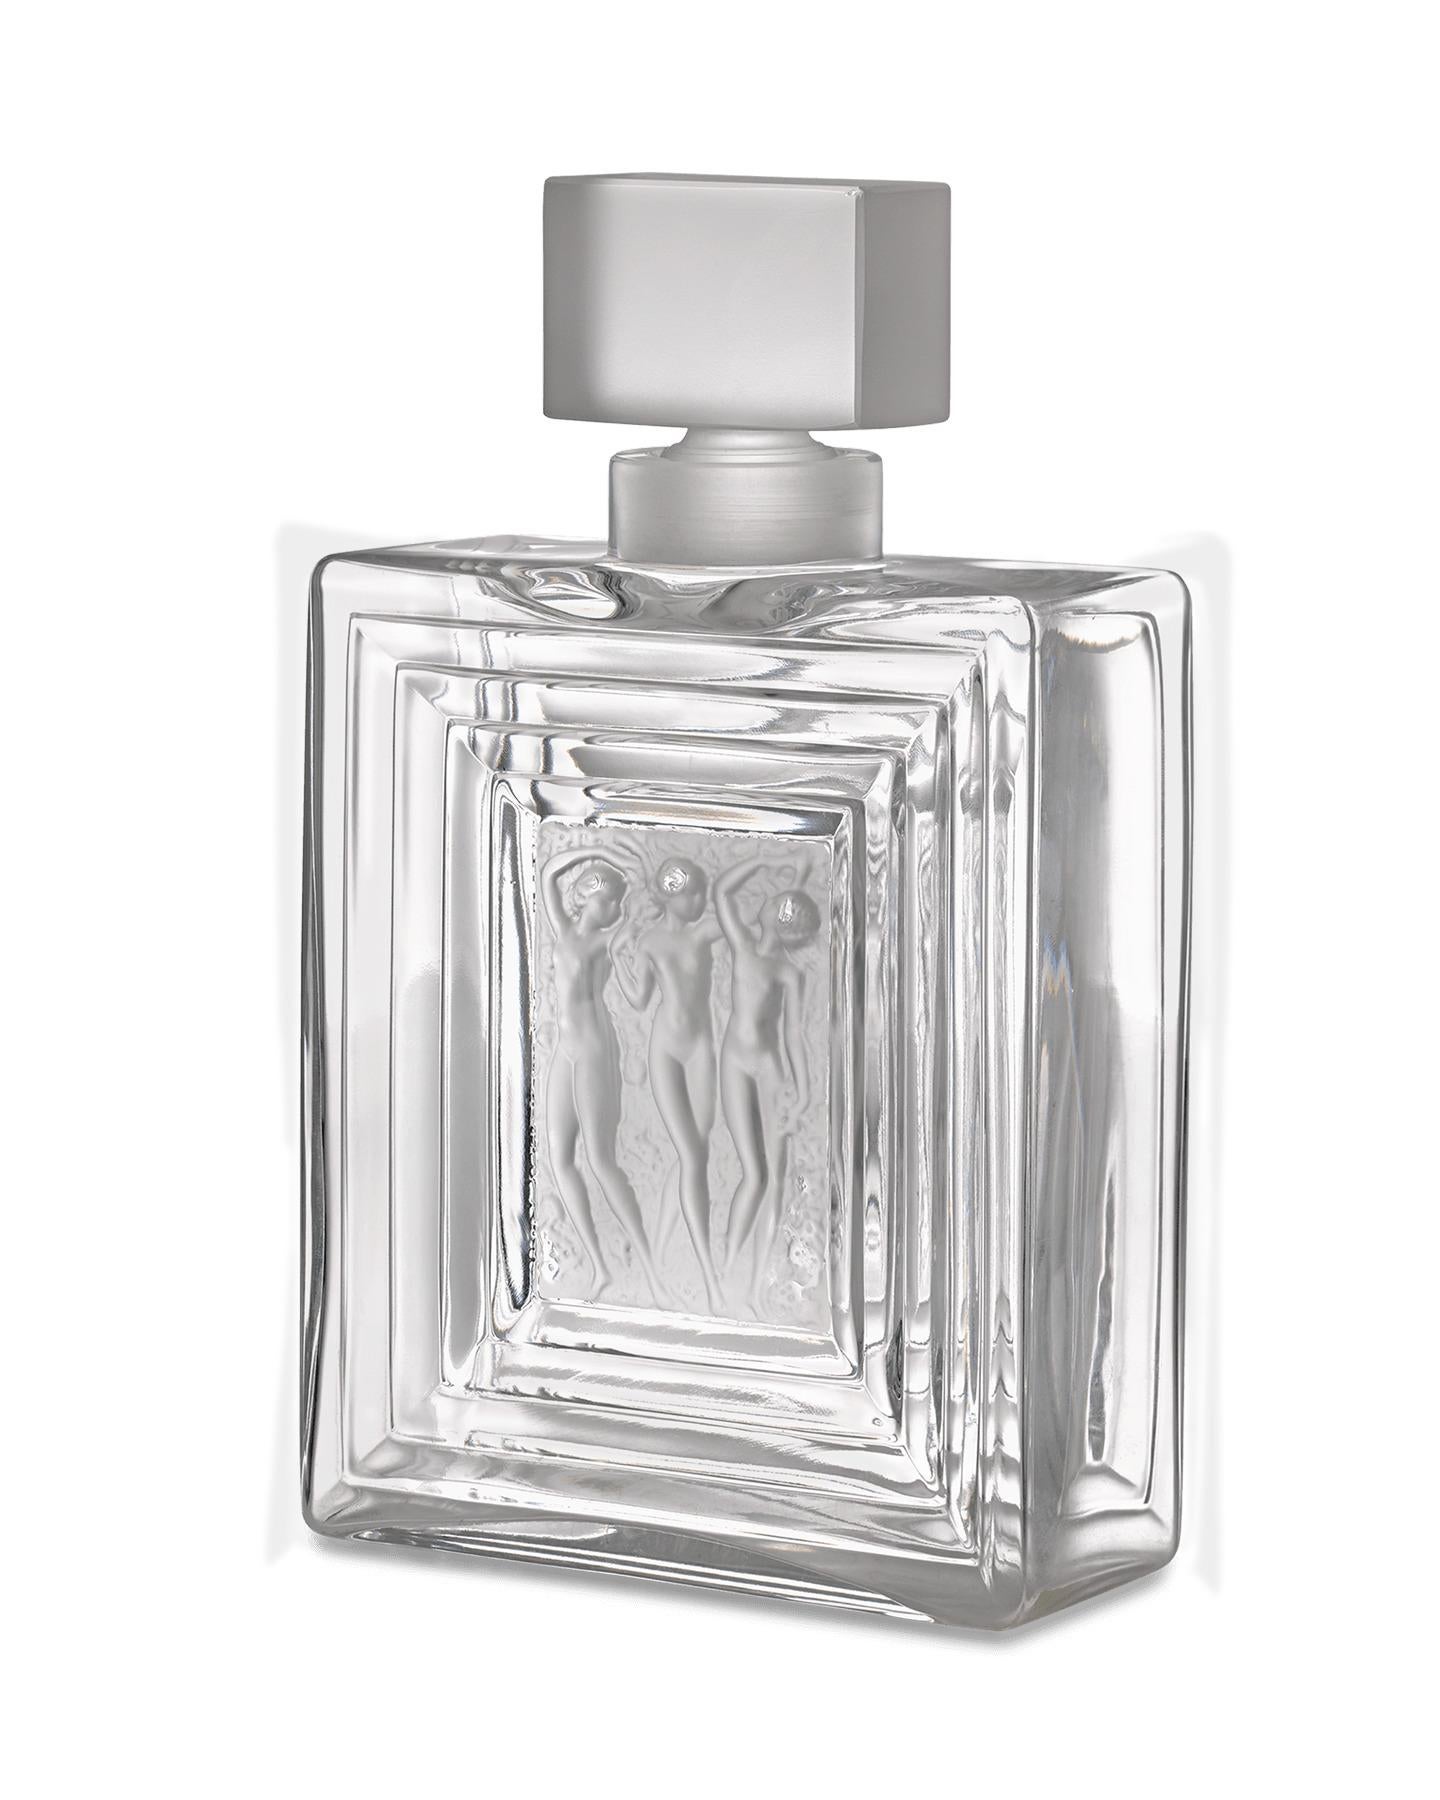 Crafted by famed French cristallerie Lalique, this stately Art Deco-era decanter is exemplary of the crystal masterpieces that garnered Lalique its extensive fame in the 20th century. The handsome angular vessel is comprised of clear and frosted